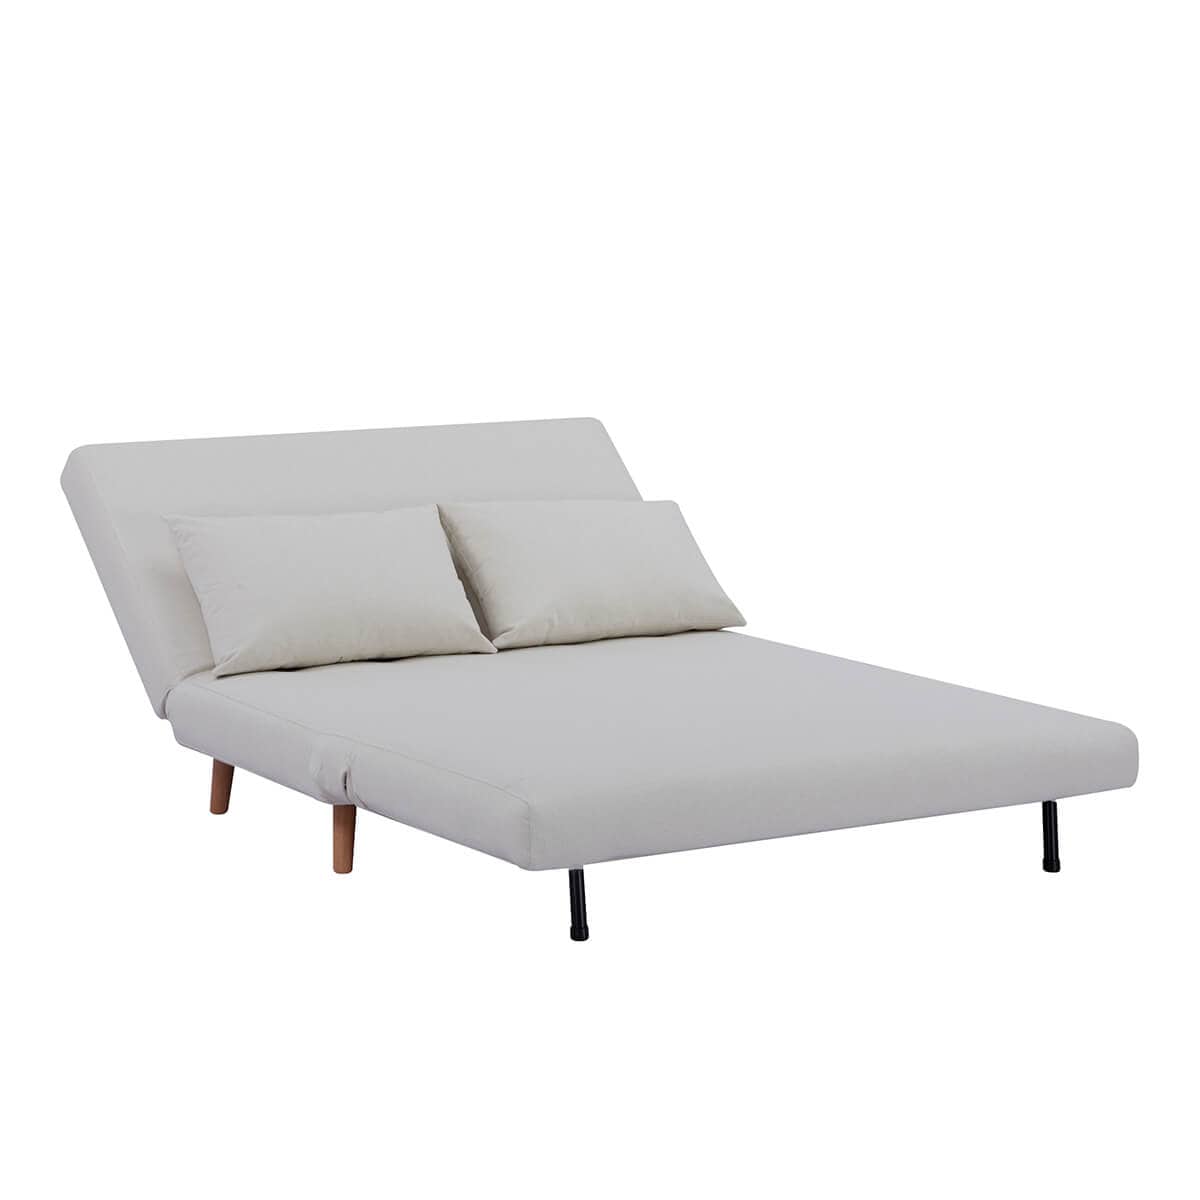 Seattle Double Click Clack Sofa Bed - Warm Natural - DUSK